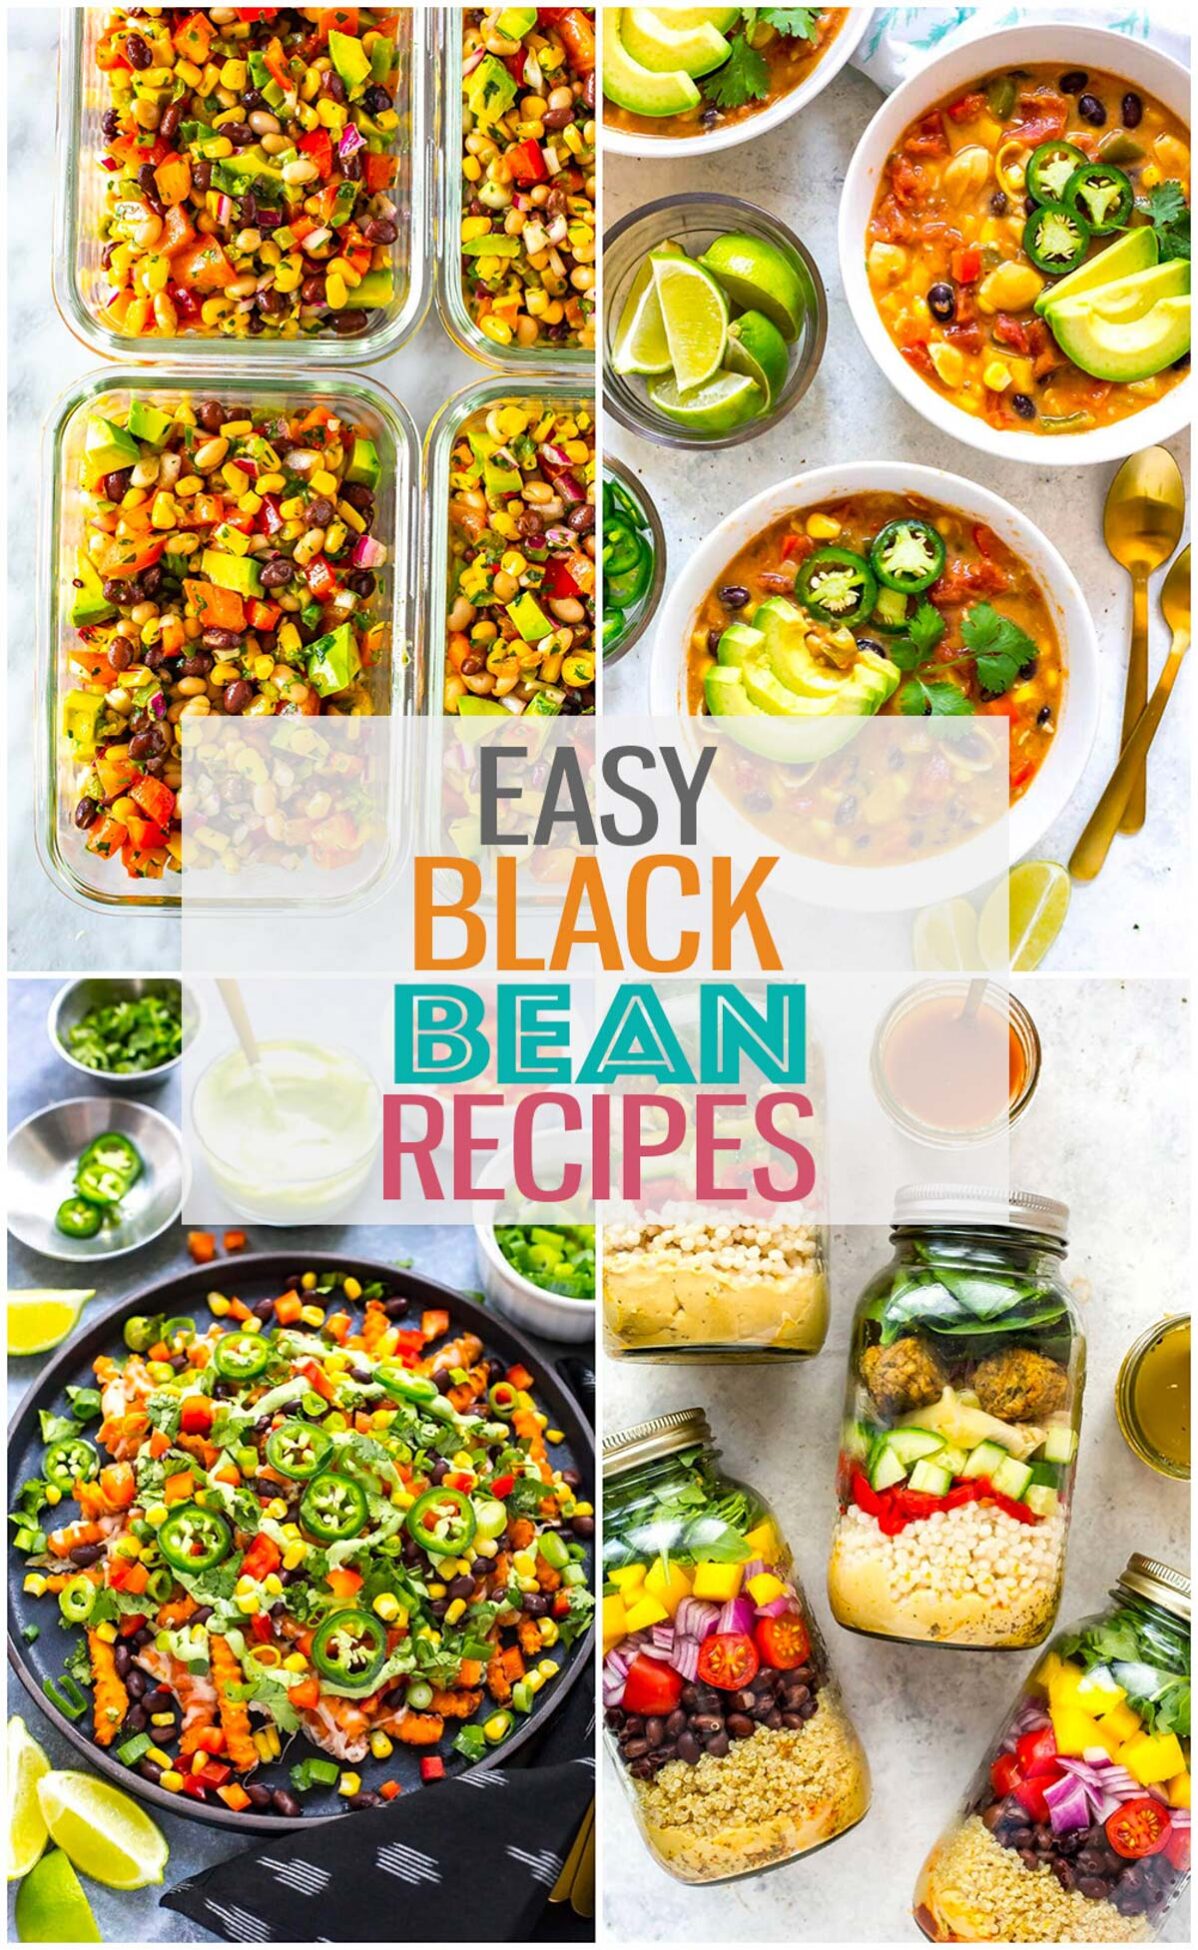 A collage of 4 different black bean recipes with the text "Easy Black Bean Recipes" layered over top.